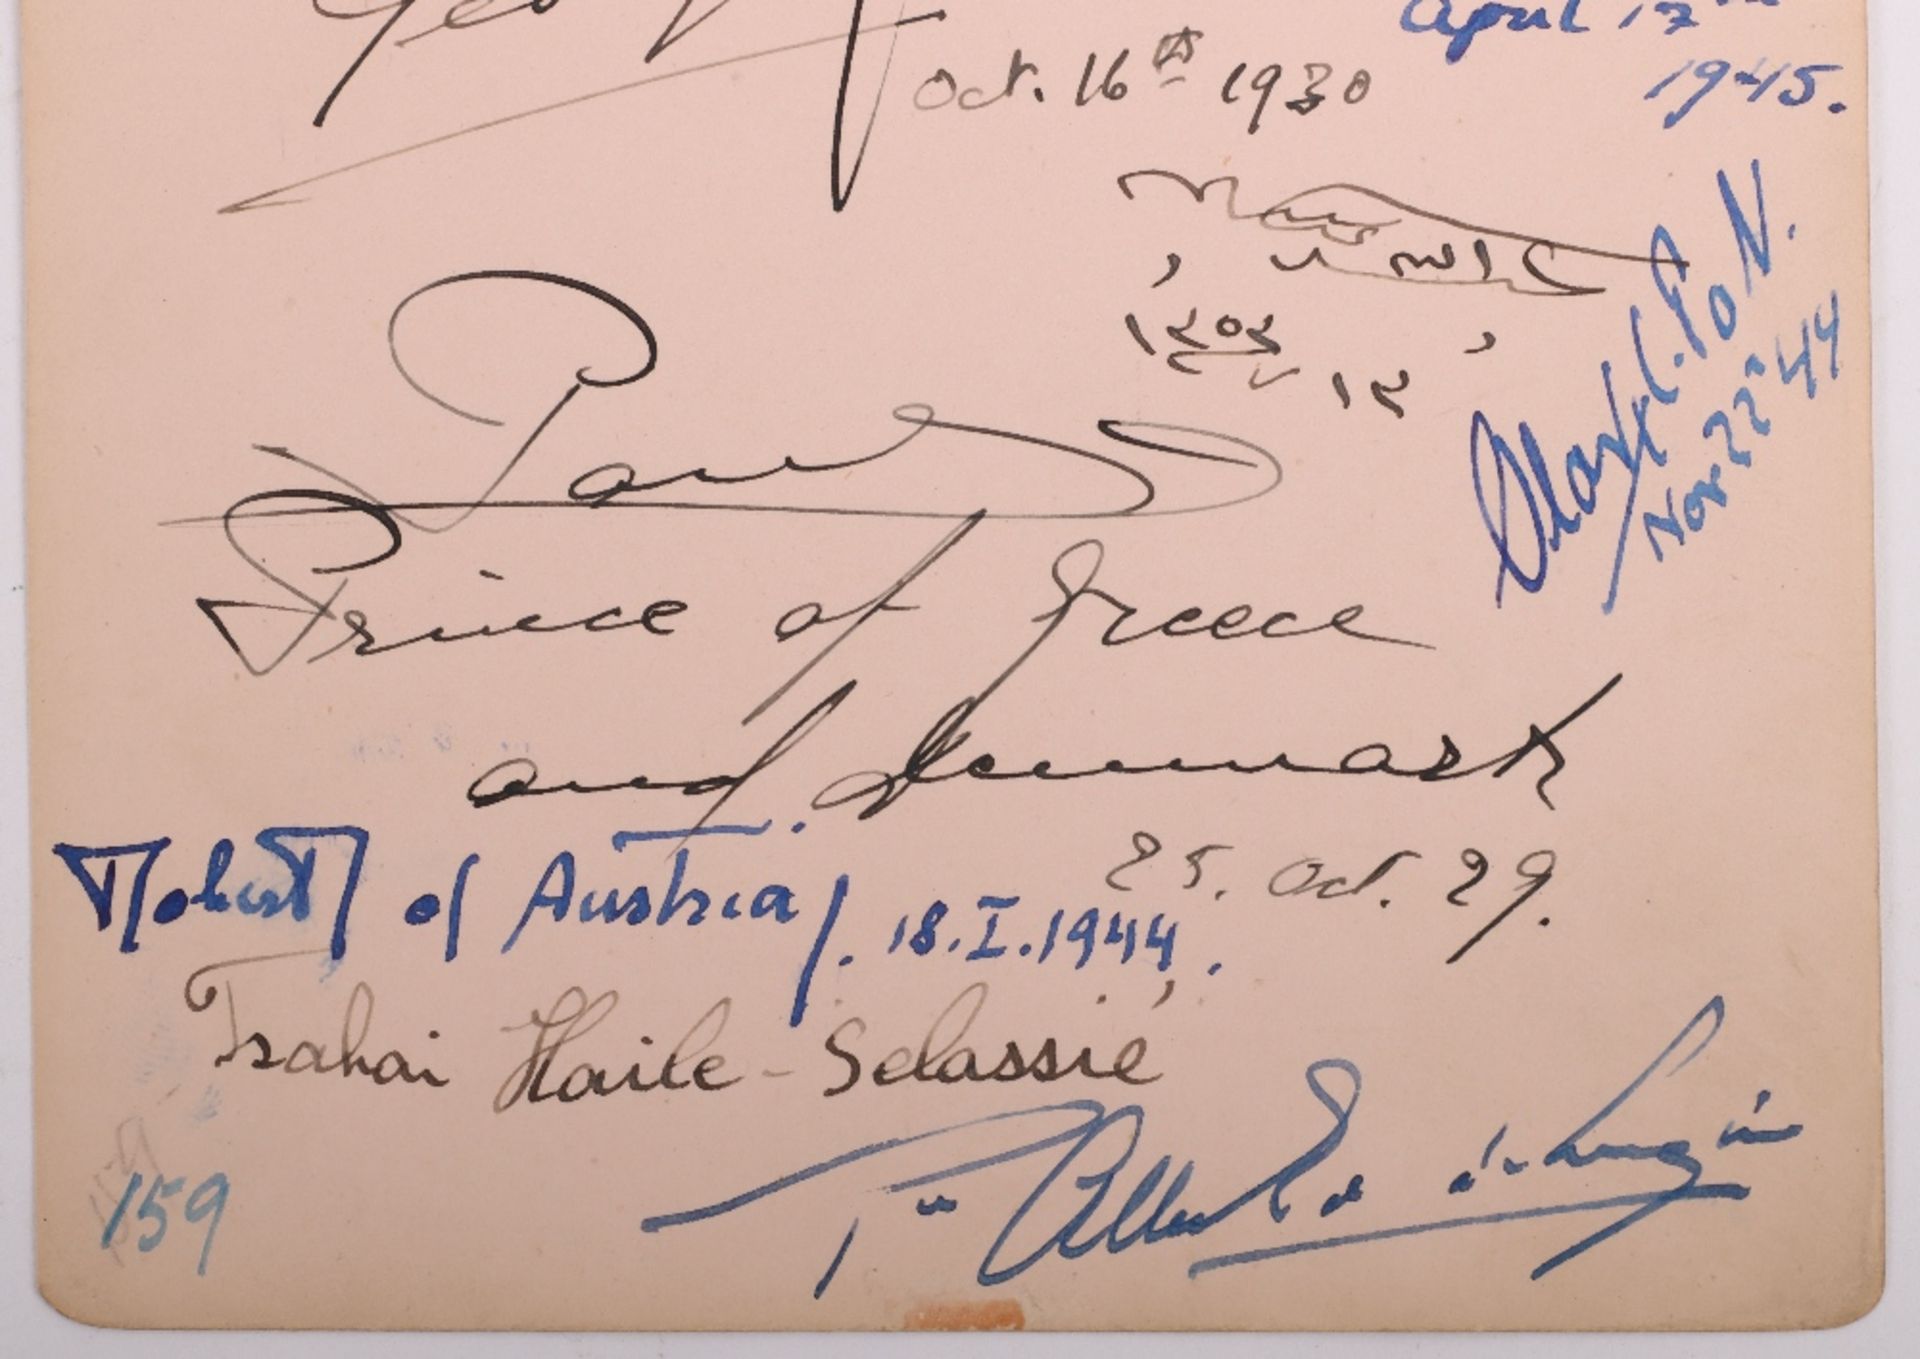 Rare Autograph Page Signed by Many Notorious World Leaders of the 20th Century - Image 4 of 5